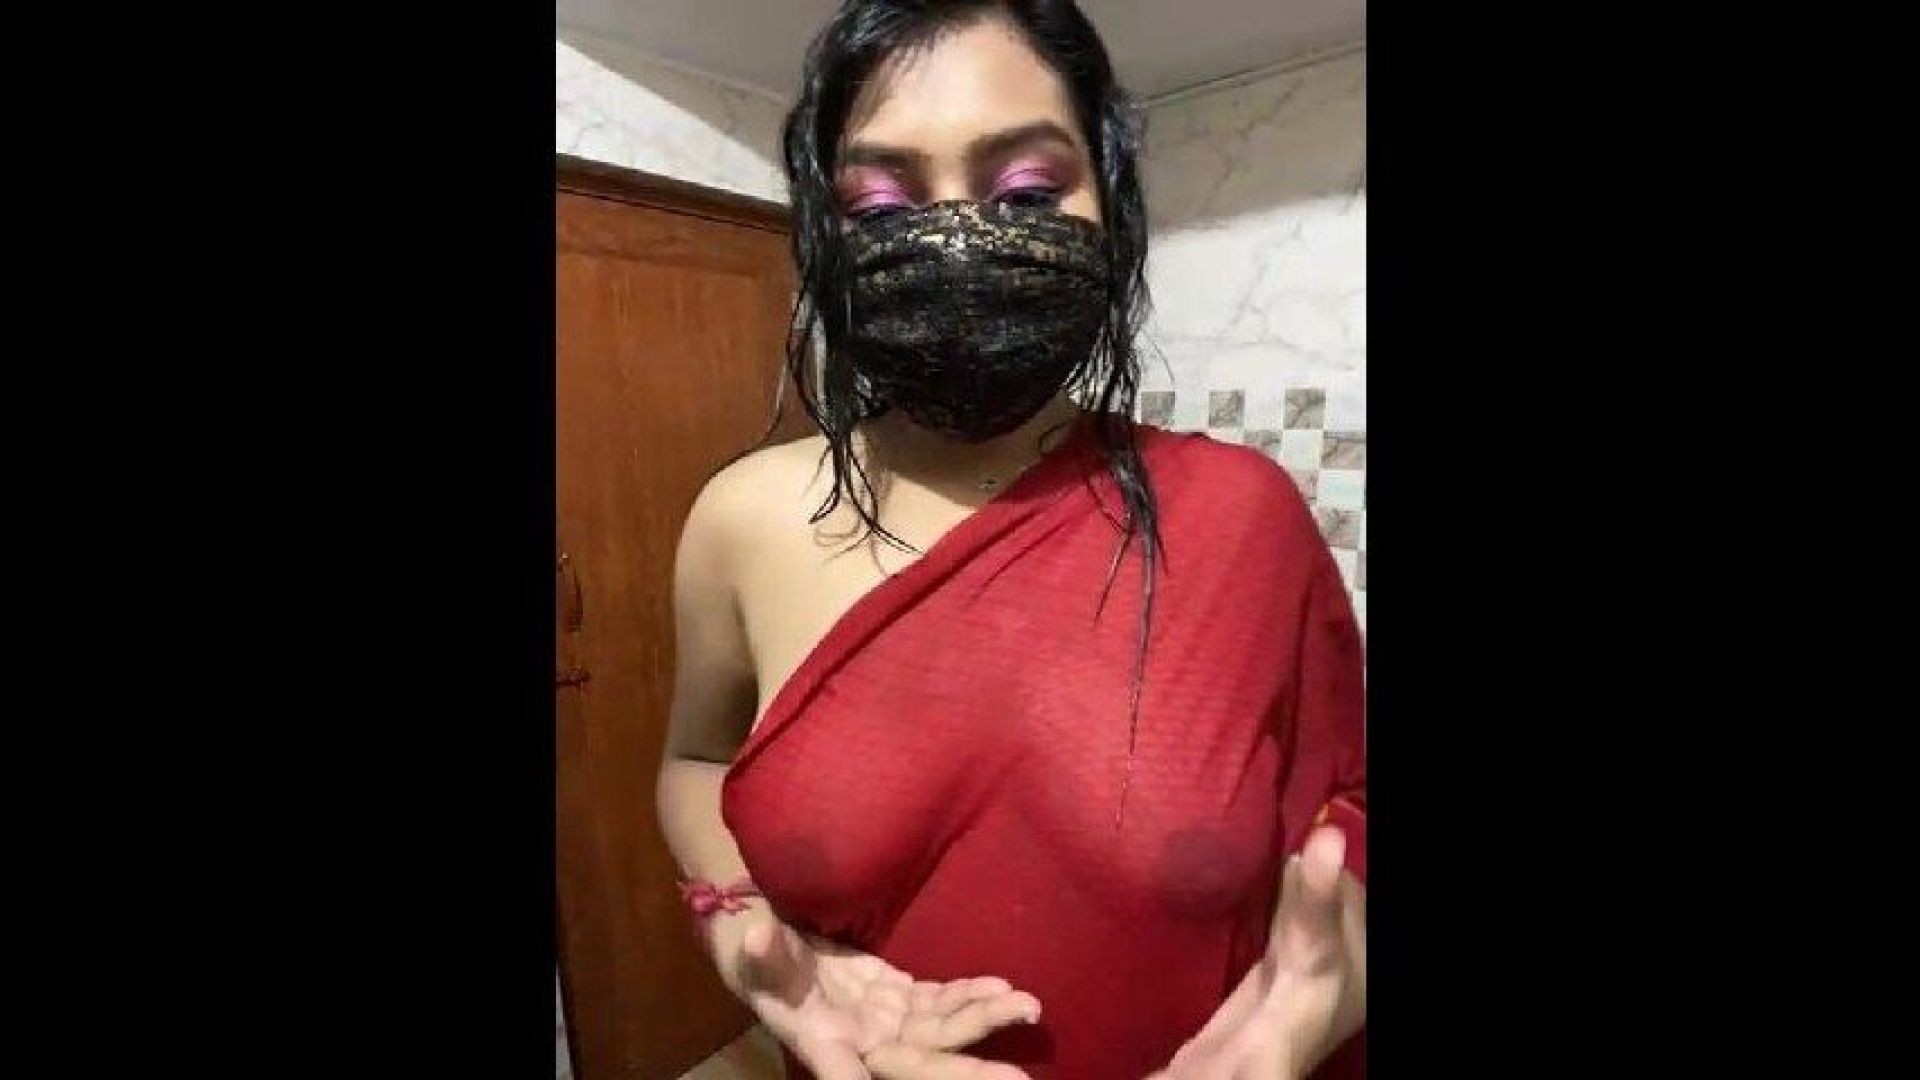 romeo and juliet Showing Boobs through Wet Saree on StripChat Live